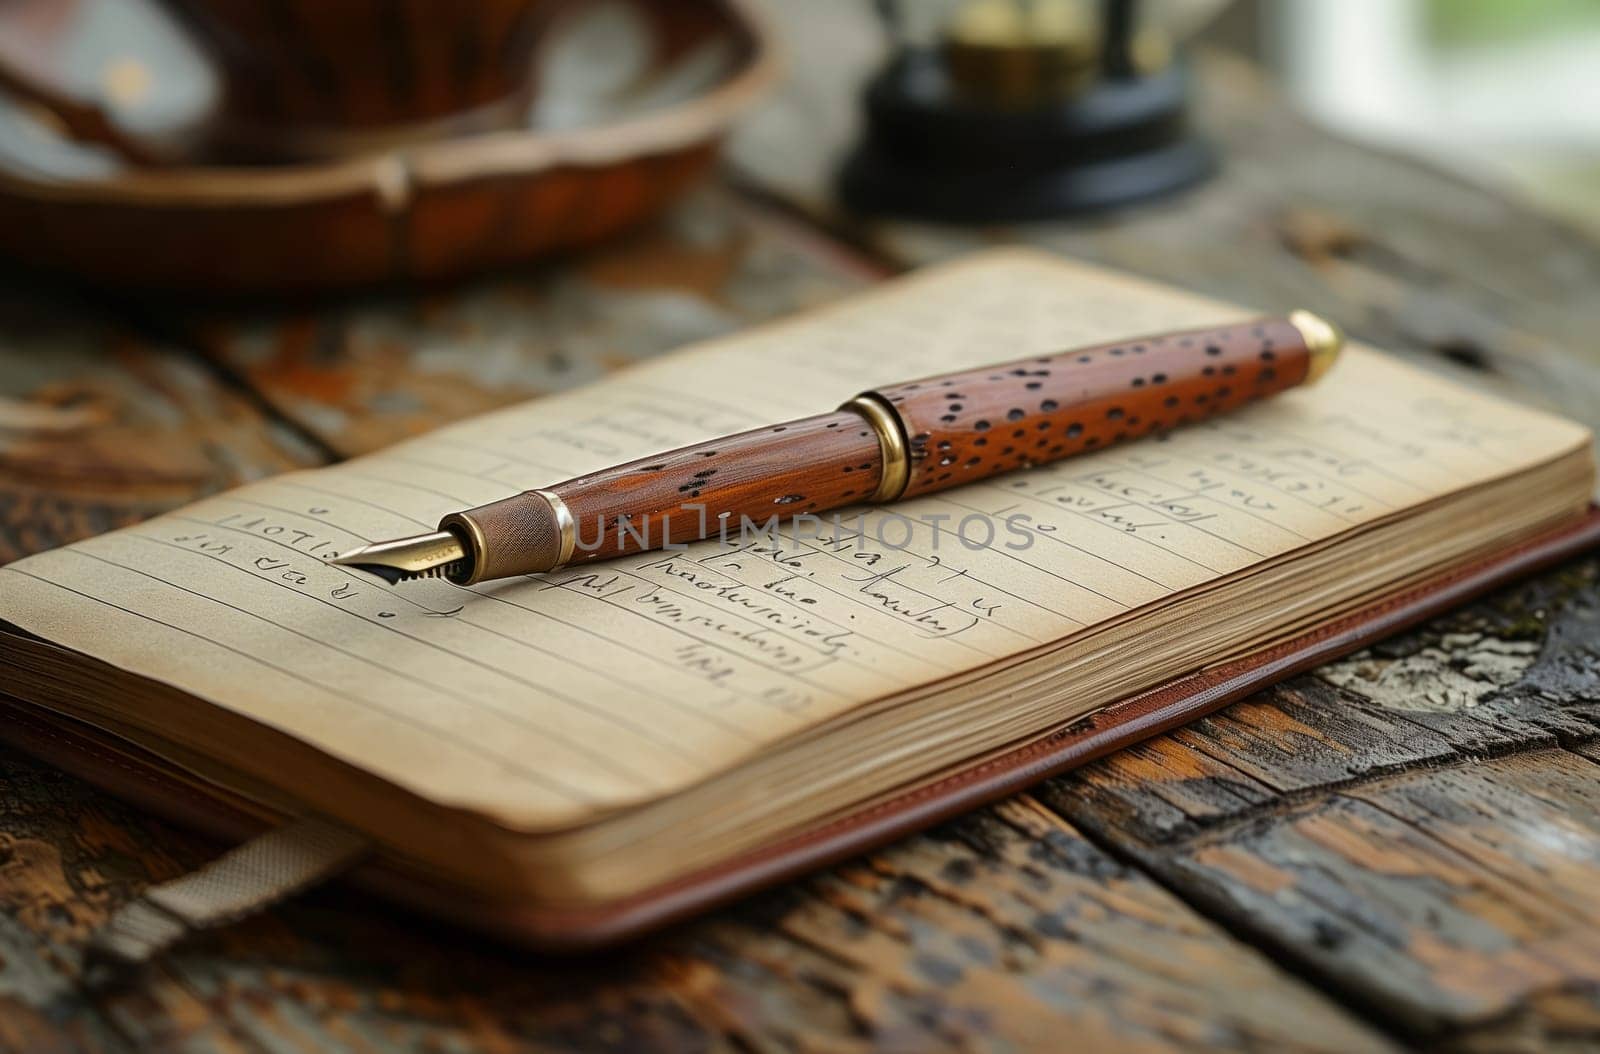 A hardwood fountain pen rests on a notebook atop a wooden table by richwolf